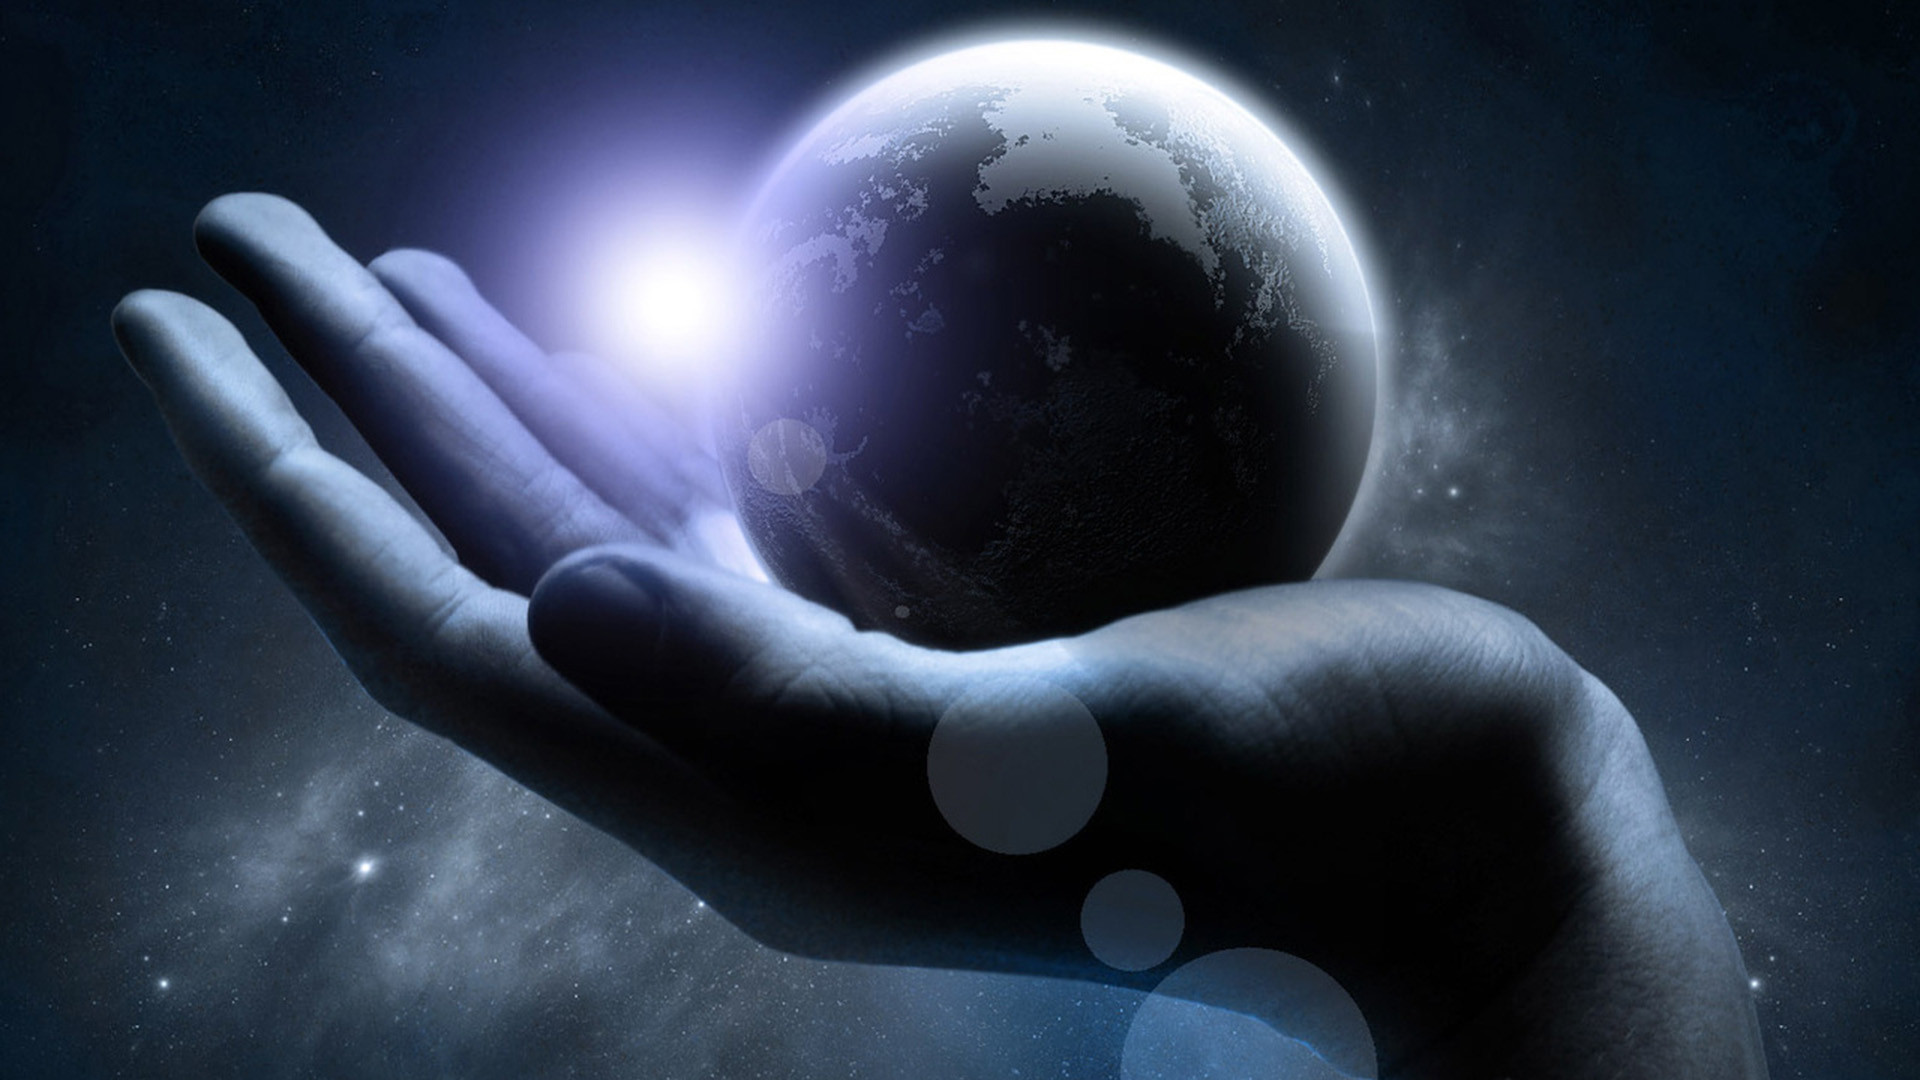 1920x1080 WallpaperUniversity.com :: Alien Hand Holding a Planet in Space .